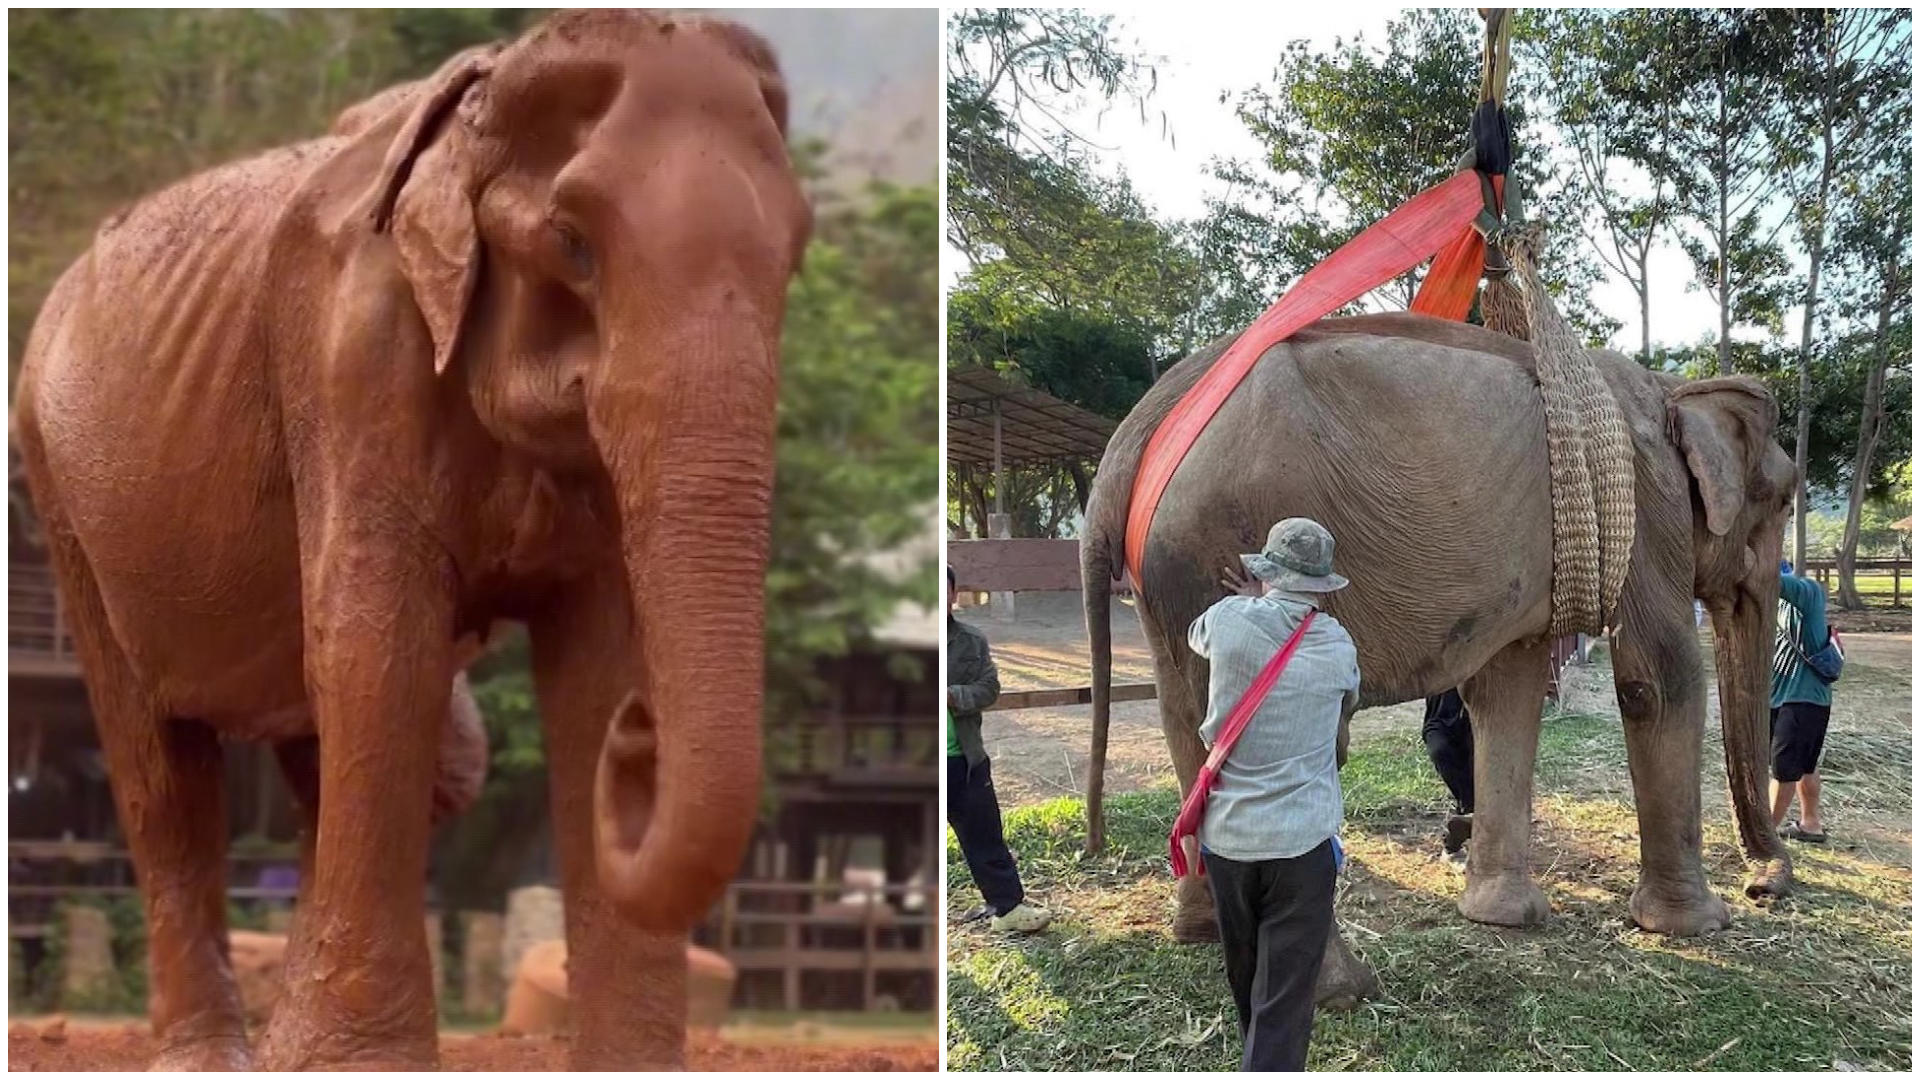 The female elephant was finally freed after 80 years of captivity!  Happy ending for Sombun